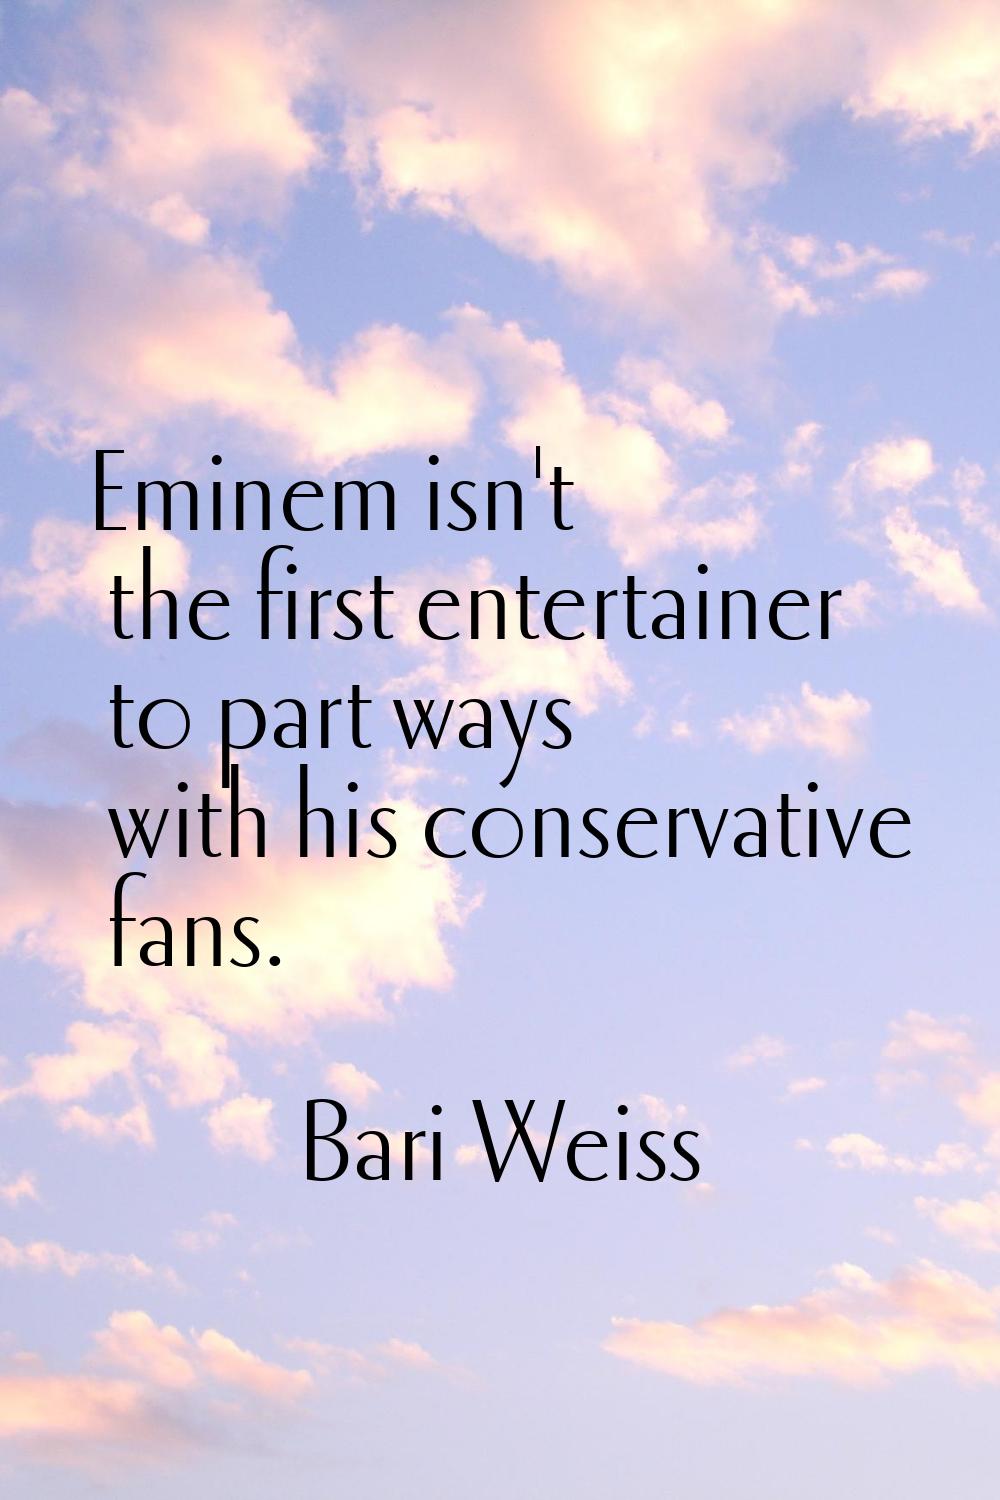 Eminem isn't the first entertainer to part ways with his conservative fans.